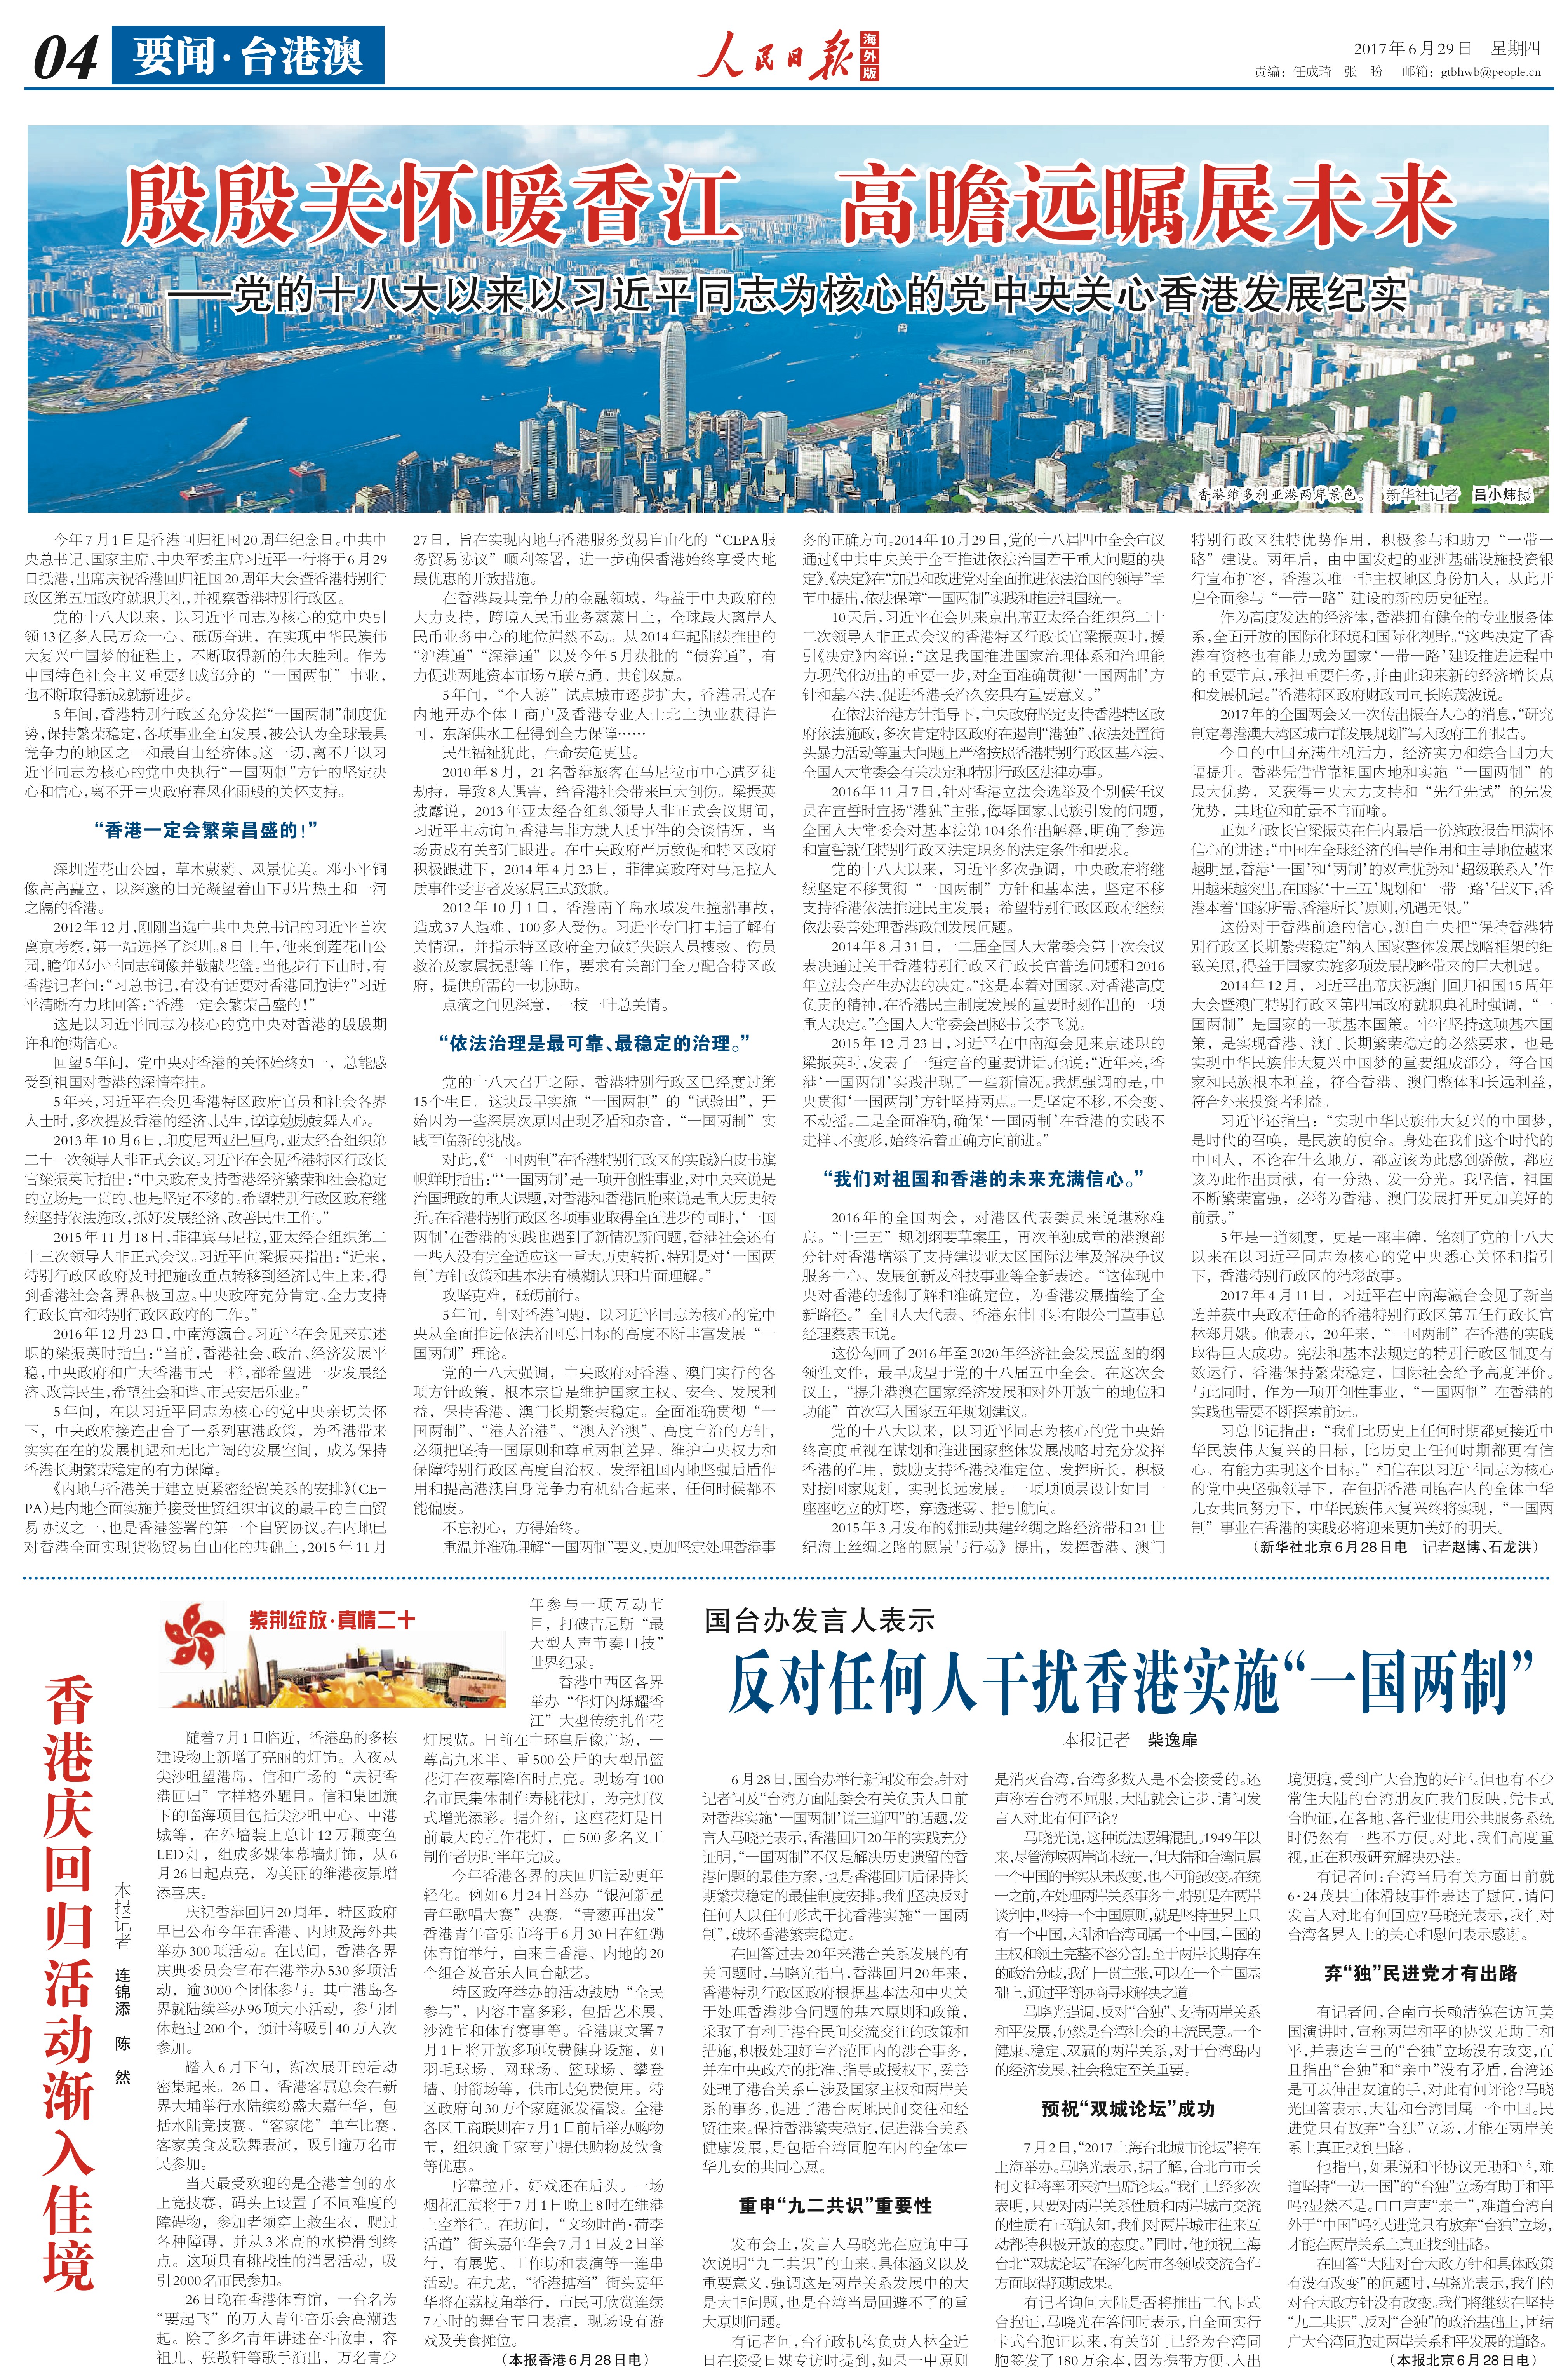 Page four of the People's Daily overseas edition, June 29, 2017. Photo: SCMP